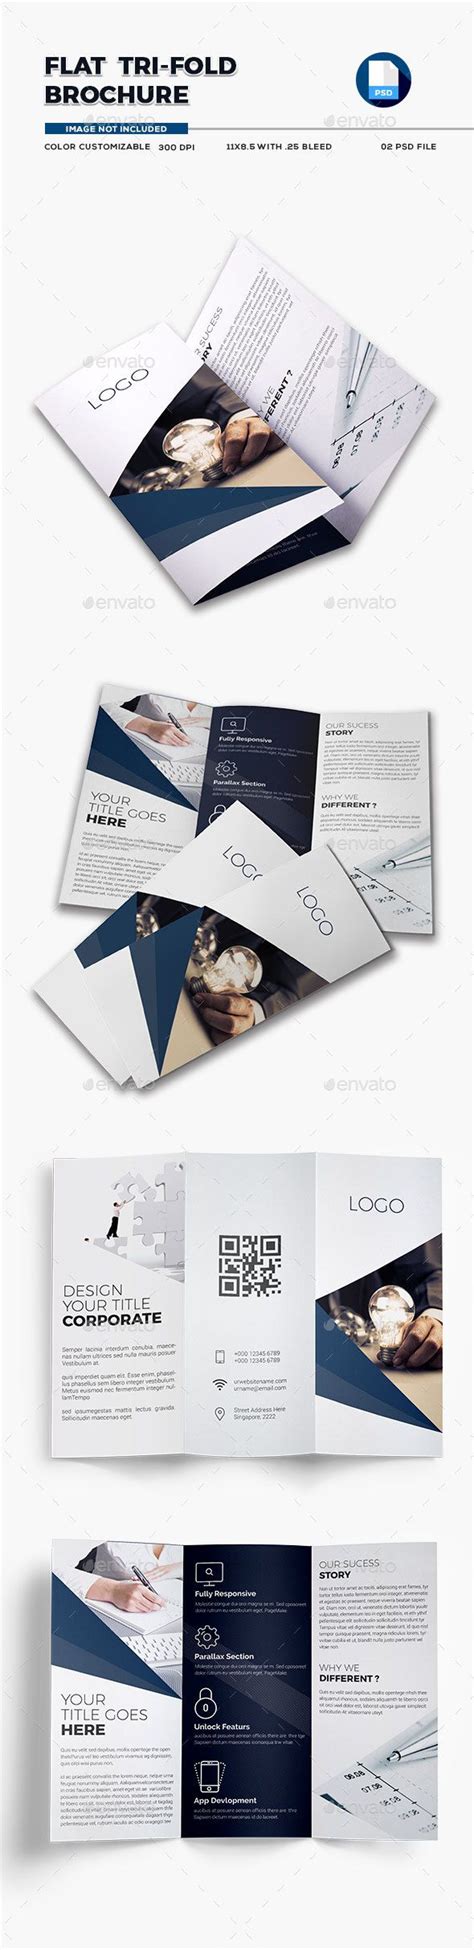 It's a sophisticated way of representing your company's products or services, and a key. Tri-fold Brochure | Trifold brochure, Trifold brochure design, Brochure